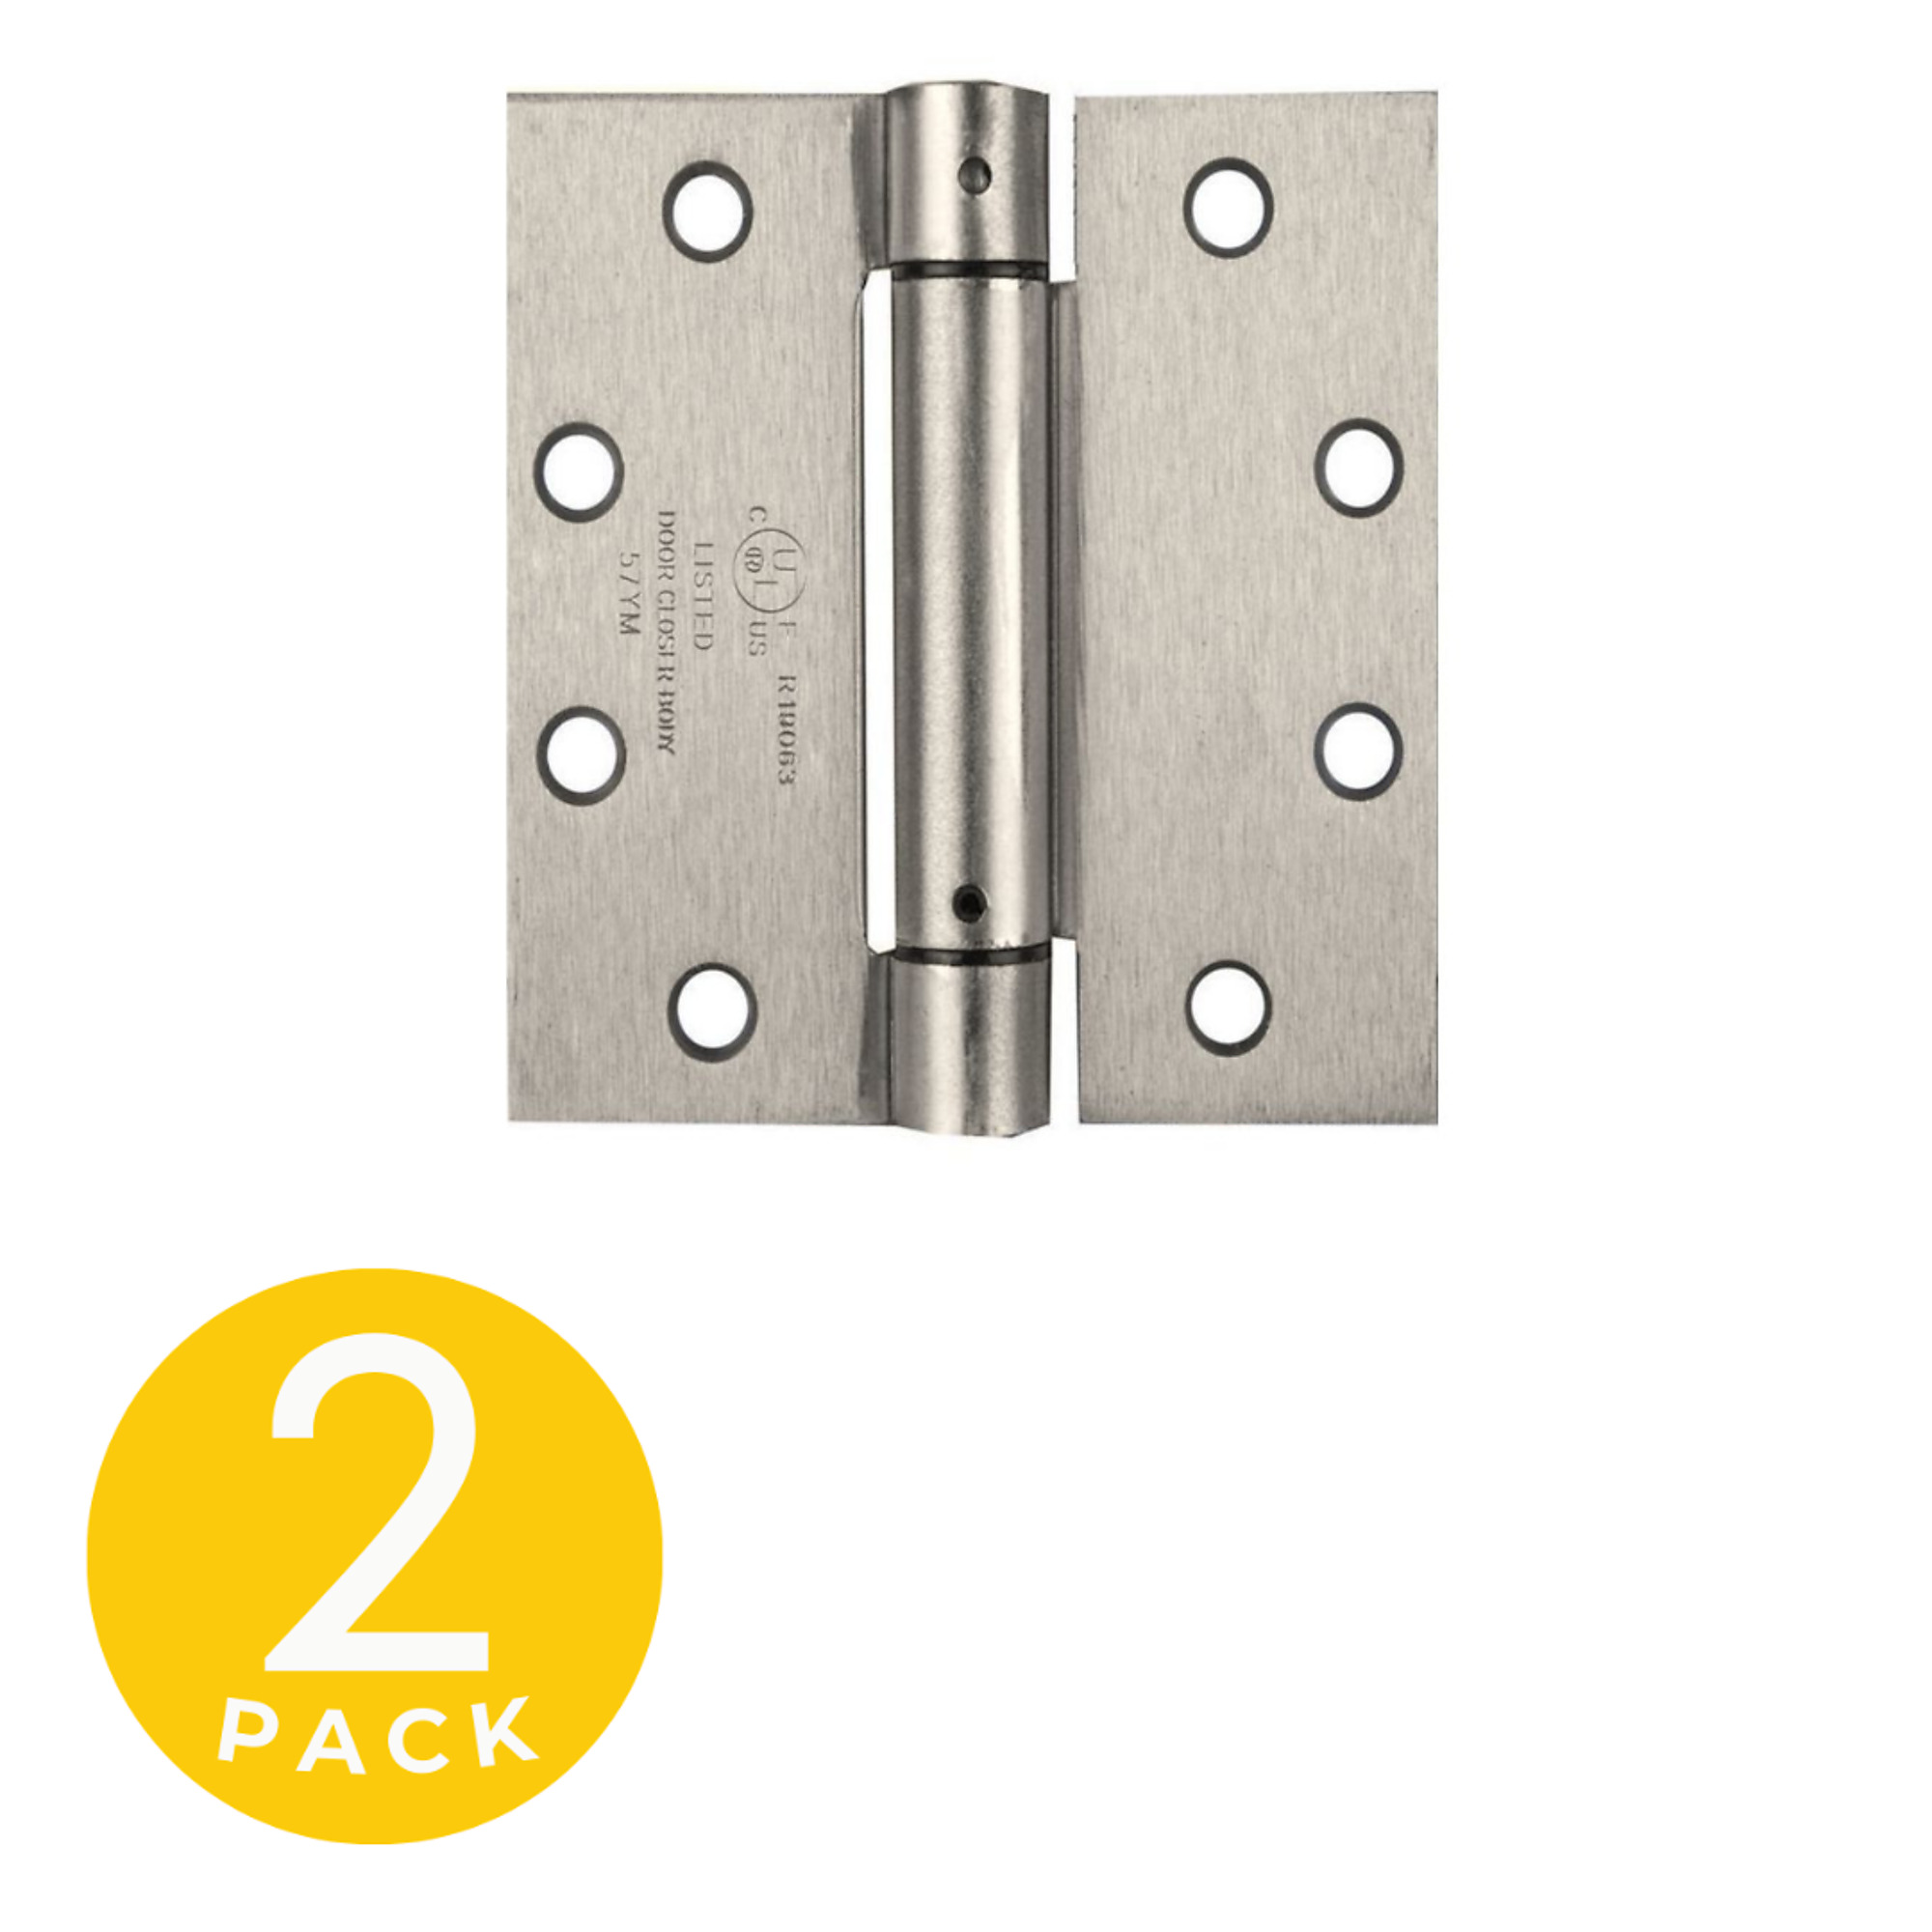 Global Door Controls, Full Mortise Spring With Non-Removable Pin Hinge - Set of 2 Model CPS4540-US15-M